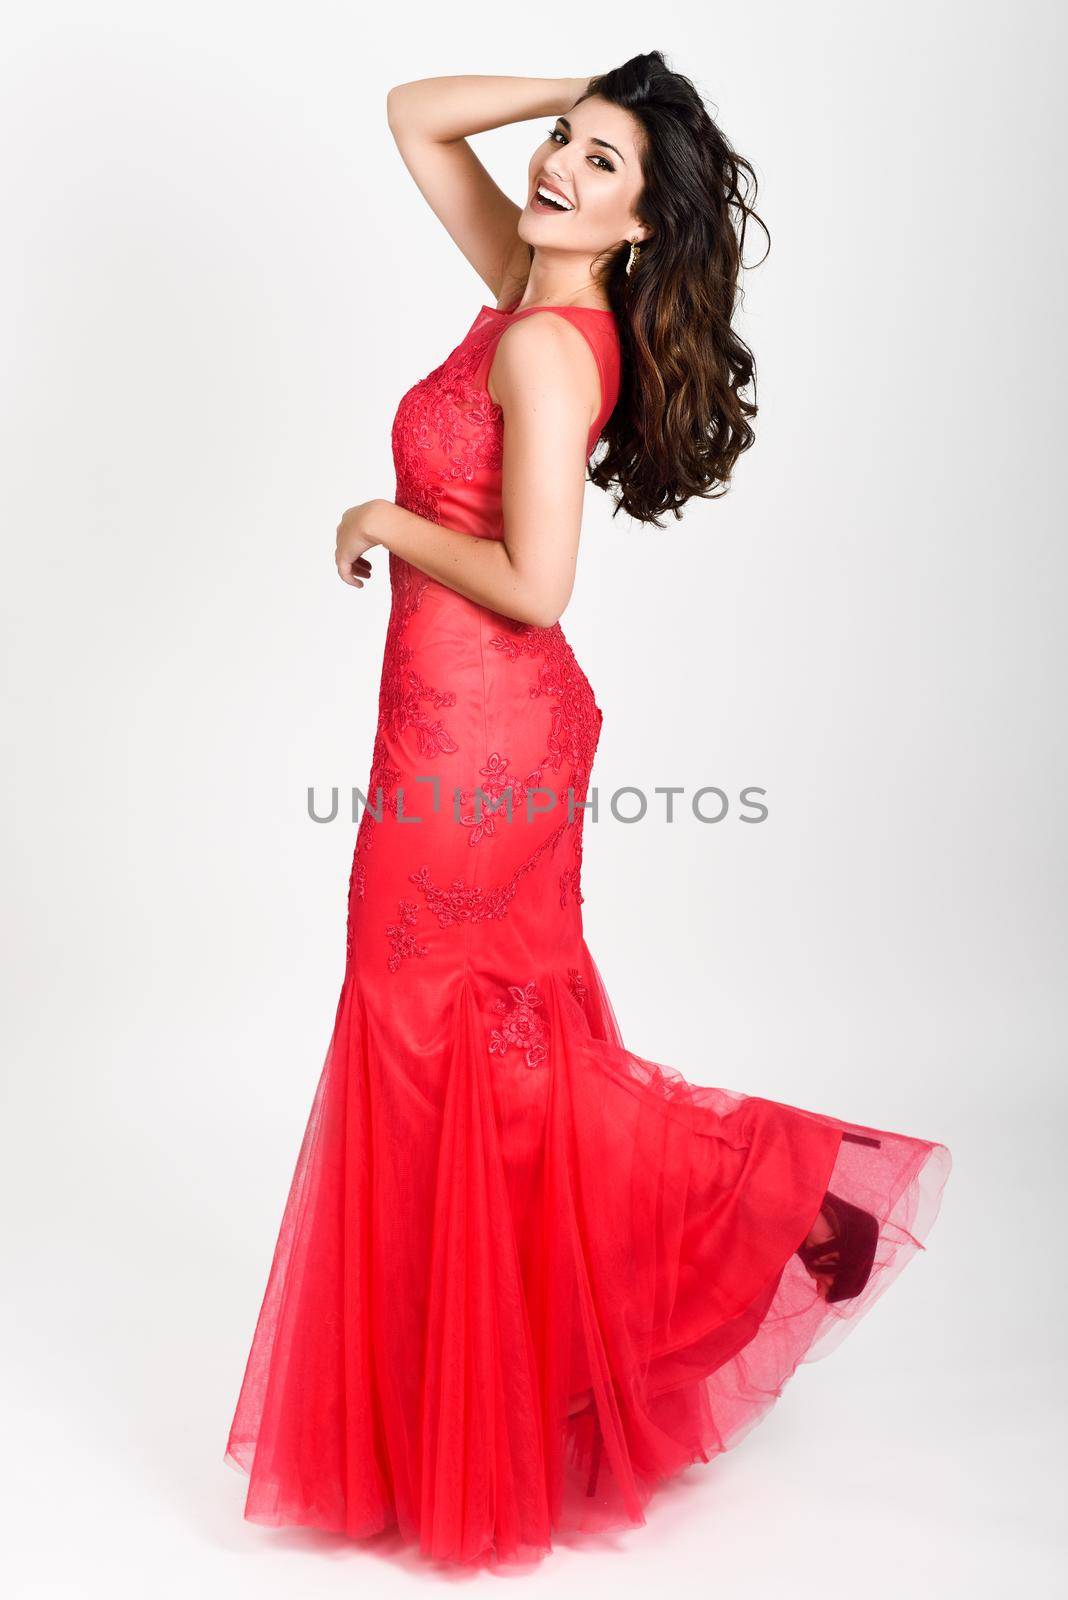 Young woman wearing long red dress on white background. Brunette girl with long hair and wavy hairstyle smiling to camera.